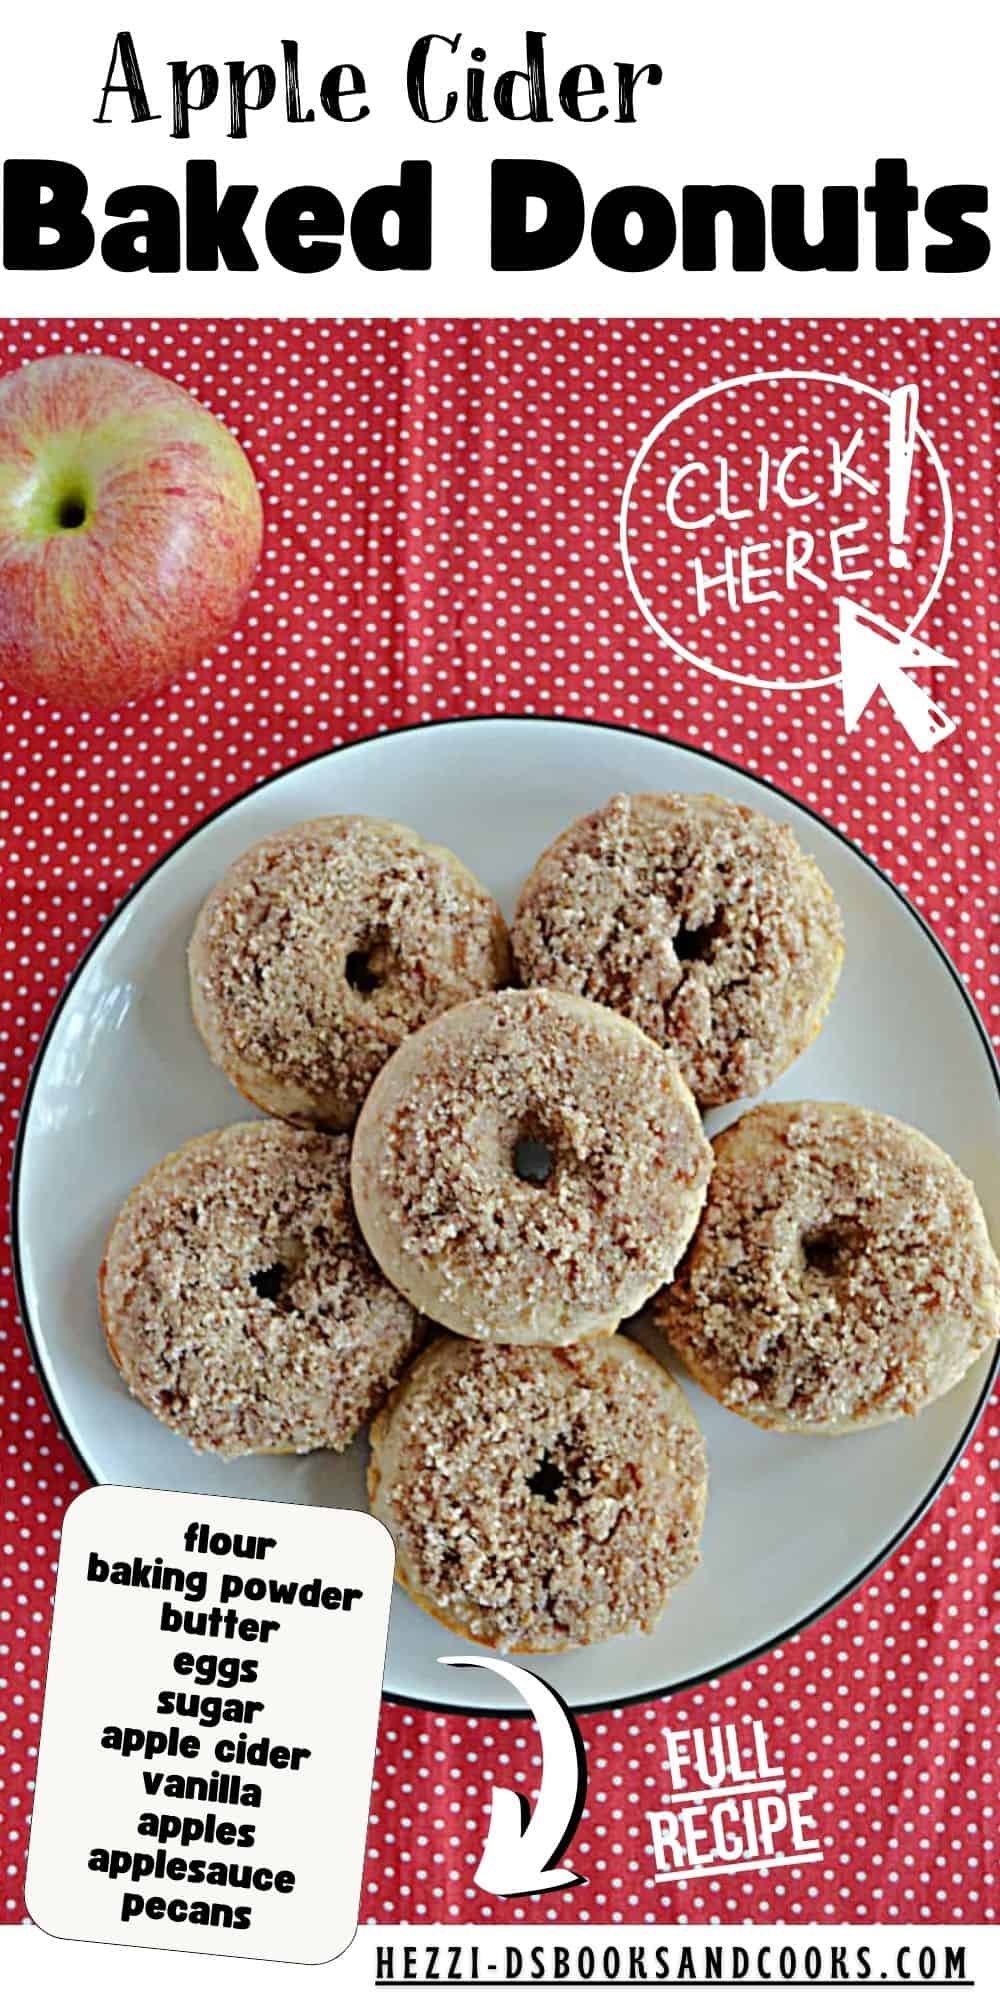 Pin Image: A plate of apple cider donuts, a list of ingredients.